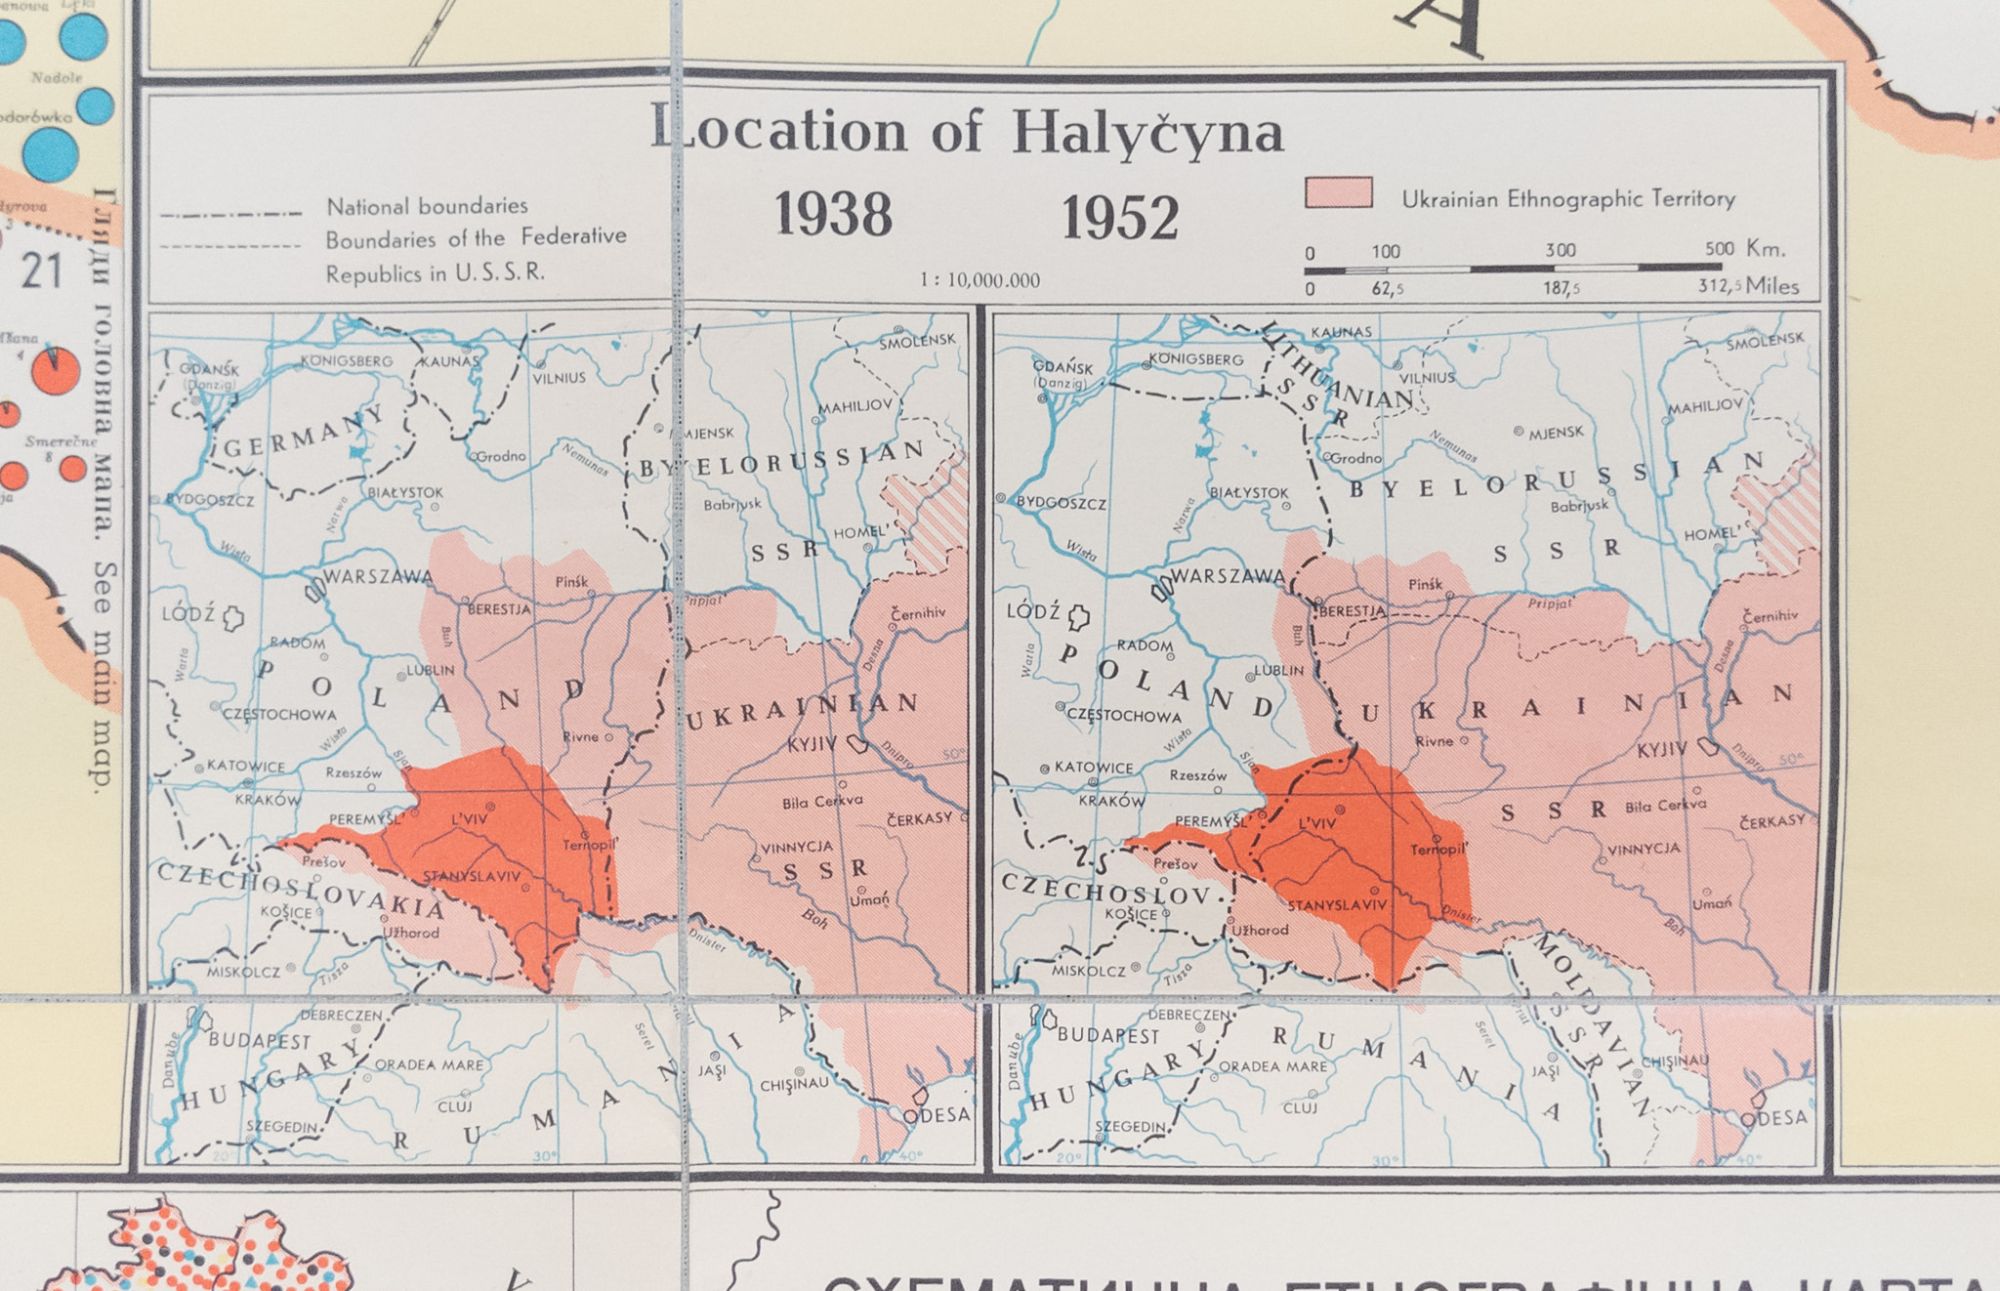 Product Image for ETHNIC GROUPS OF THE SOUTH-WESTERN UKRAINE (HALYCYNA-GALICIA) ON THE 1ST JANUARY 1939. I. VOLUMEN: ETHNOGRAPHIC MAP OF THE SOUTH-WESTERN UKRAINE (HALYCYNA-GALICIA) (MEMOIRS OF THE SCIENTIFIC SEVCENKO SOCIETY, VOL. CLX)